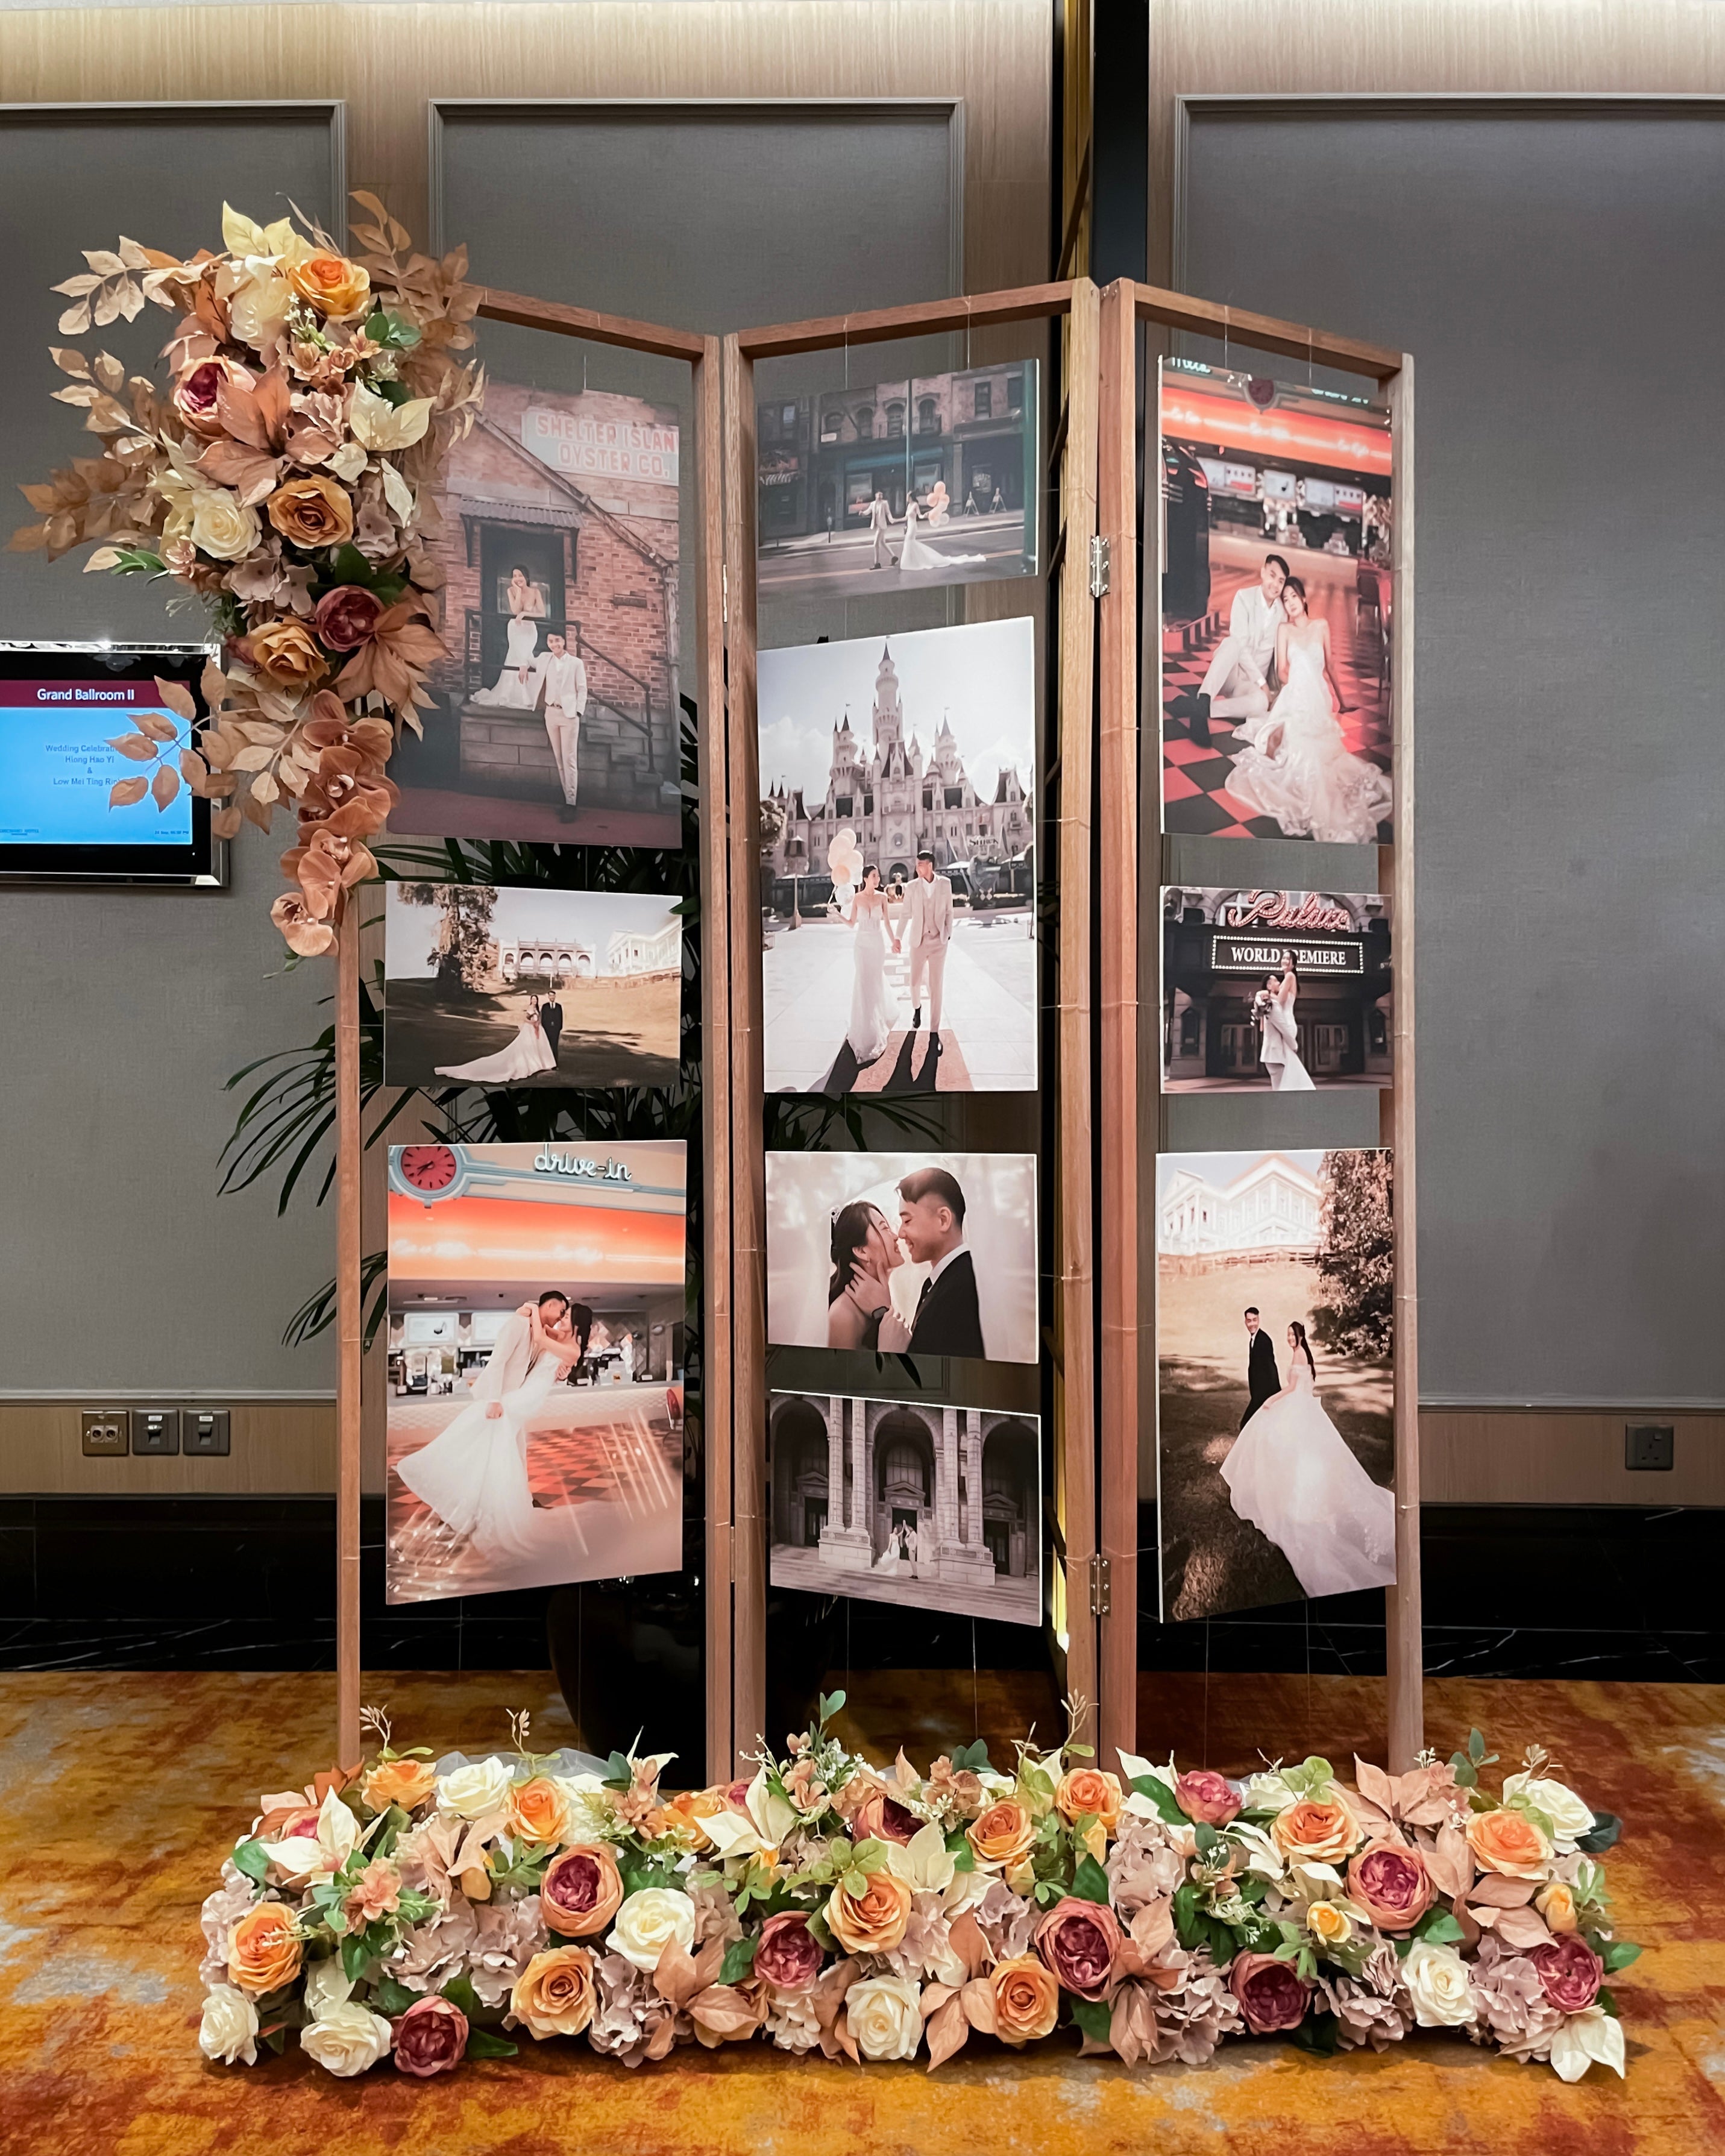 Affordable Wedding Reception Decor in Singapore - Rustic Photo Gallery with Brown & Cream Florals in Autumn Theme (Venue: Orchard Hotel)